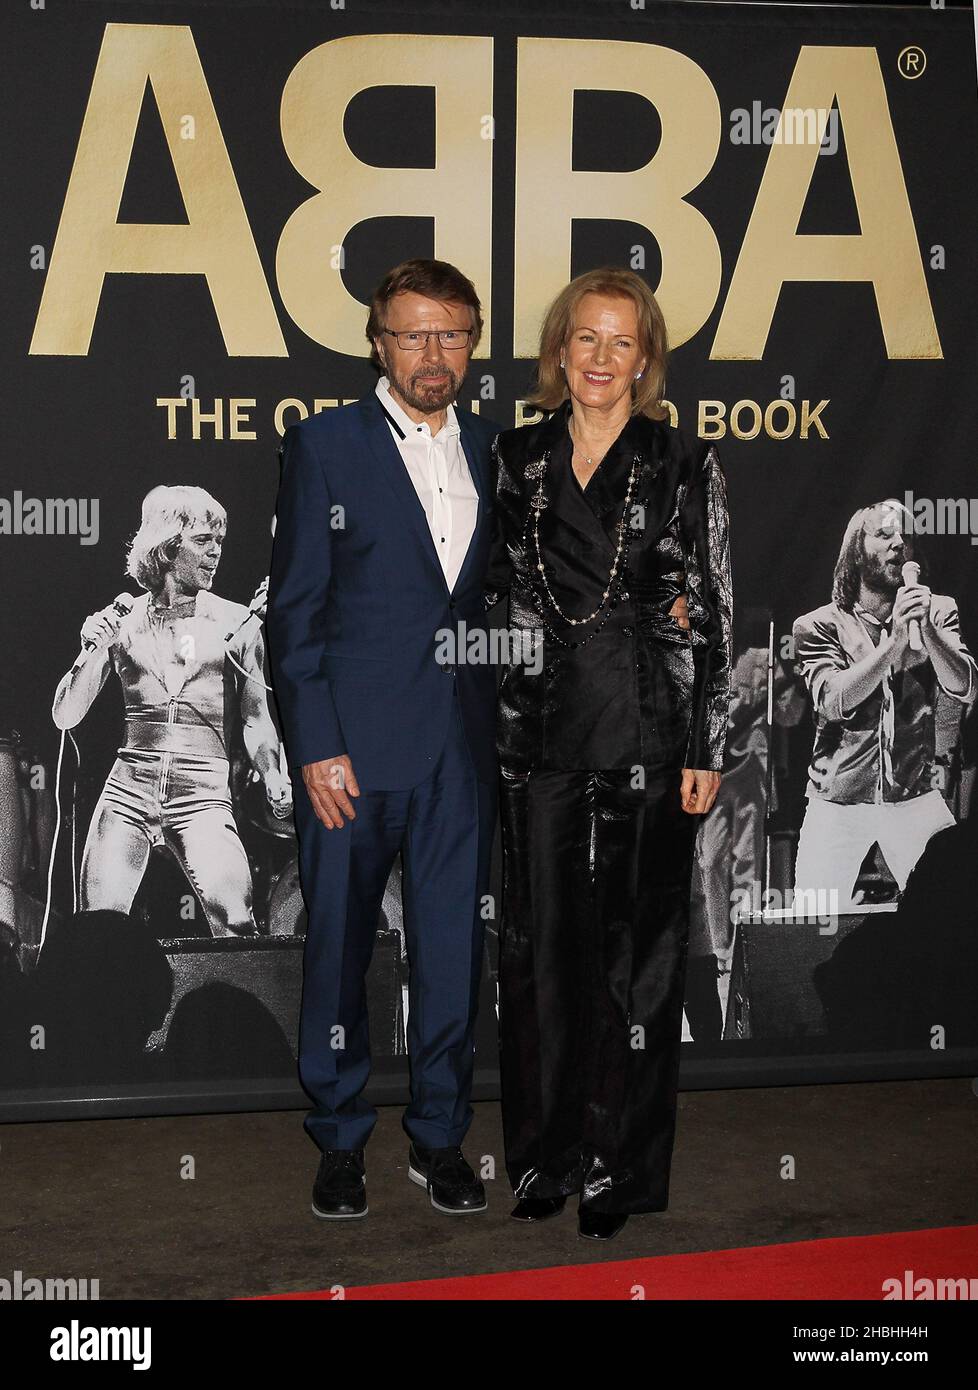 Bjorn Ulvaeus and Anni-Frid Lyngstad of Abba attending The Official Photo Book release at the Tate Modern, Bankside, London. Stock Photo